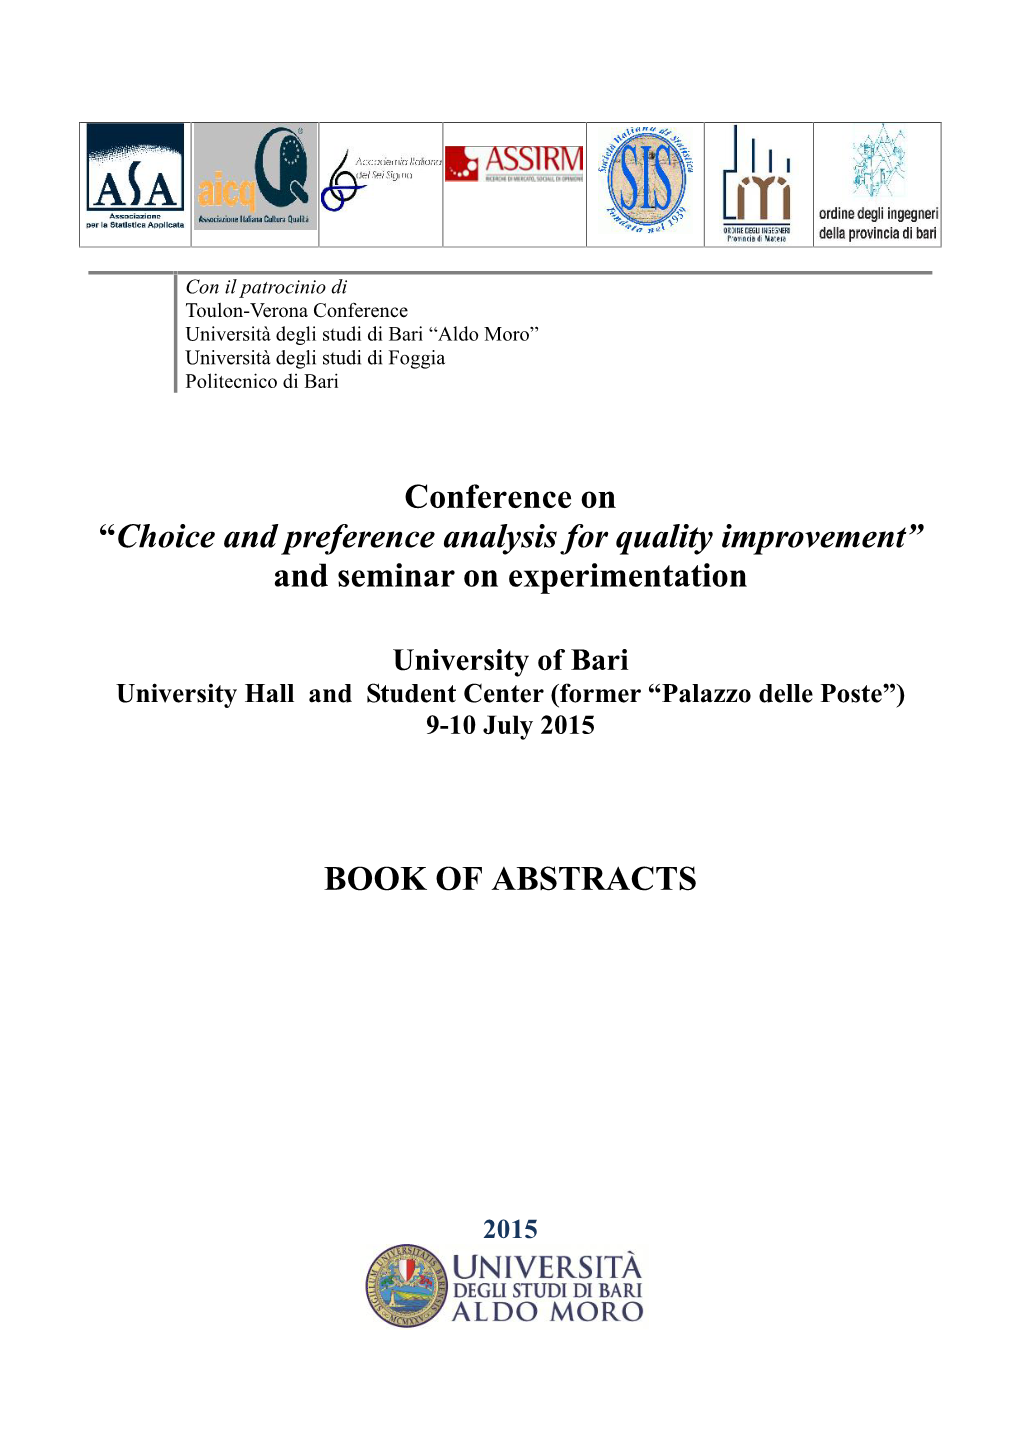 Choice and Preference Analysis for Quality Improvement” and Seminar on Experimentation